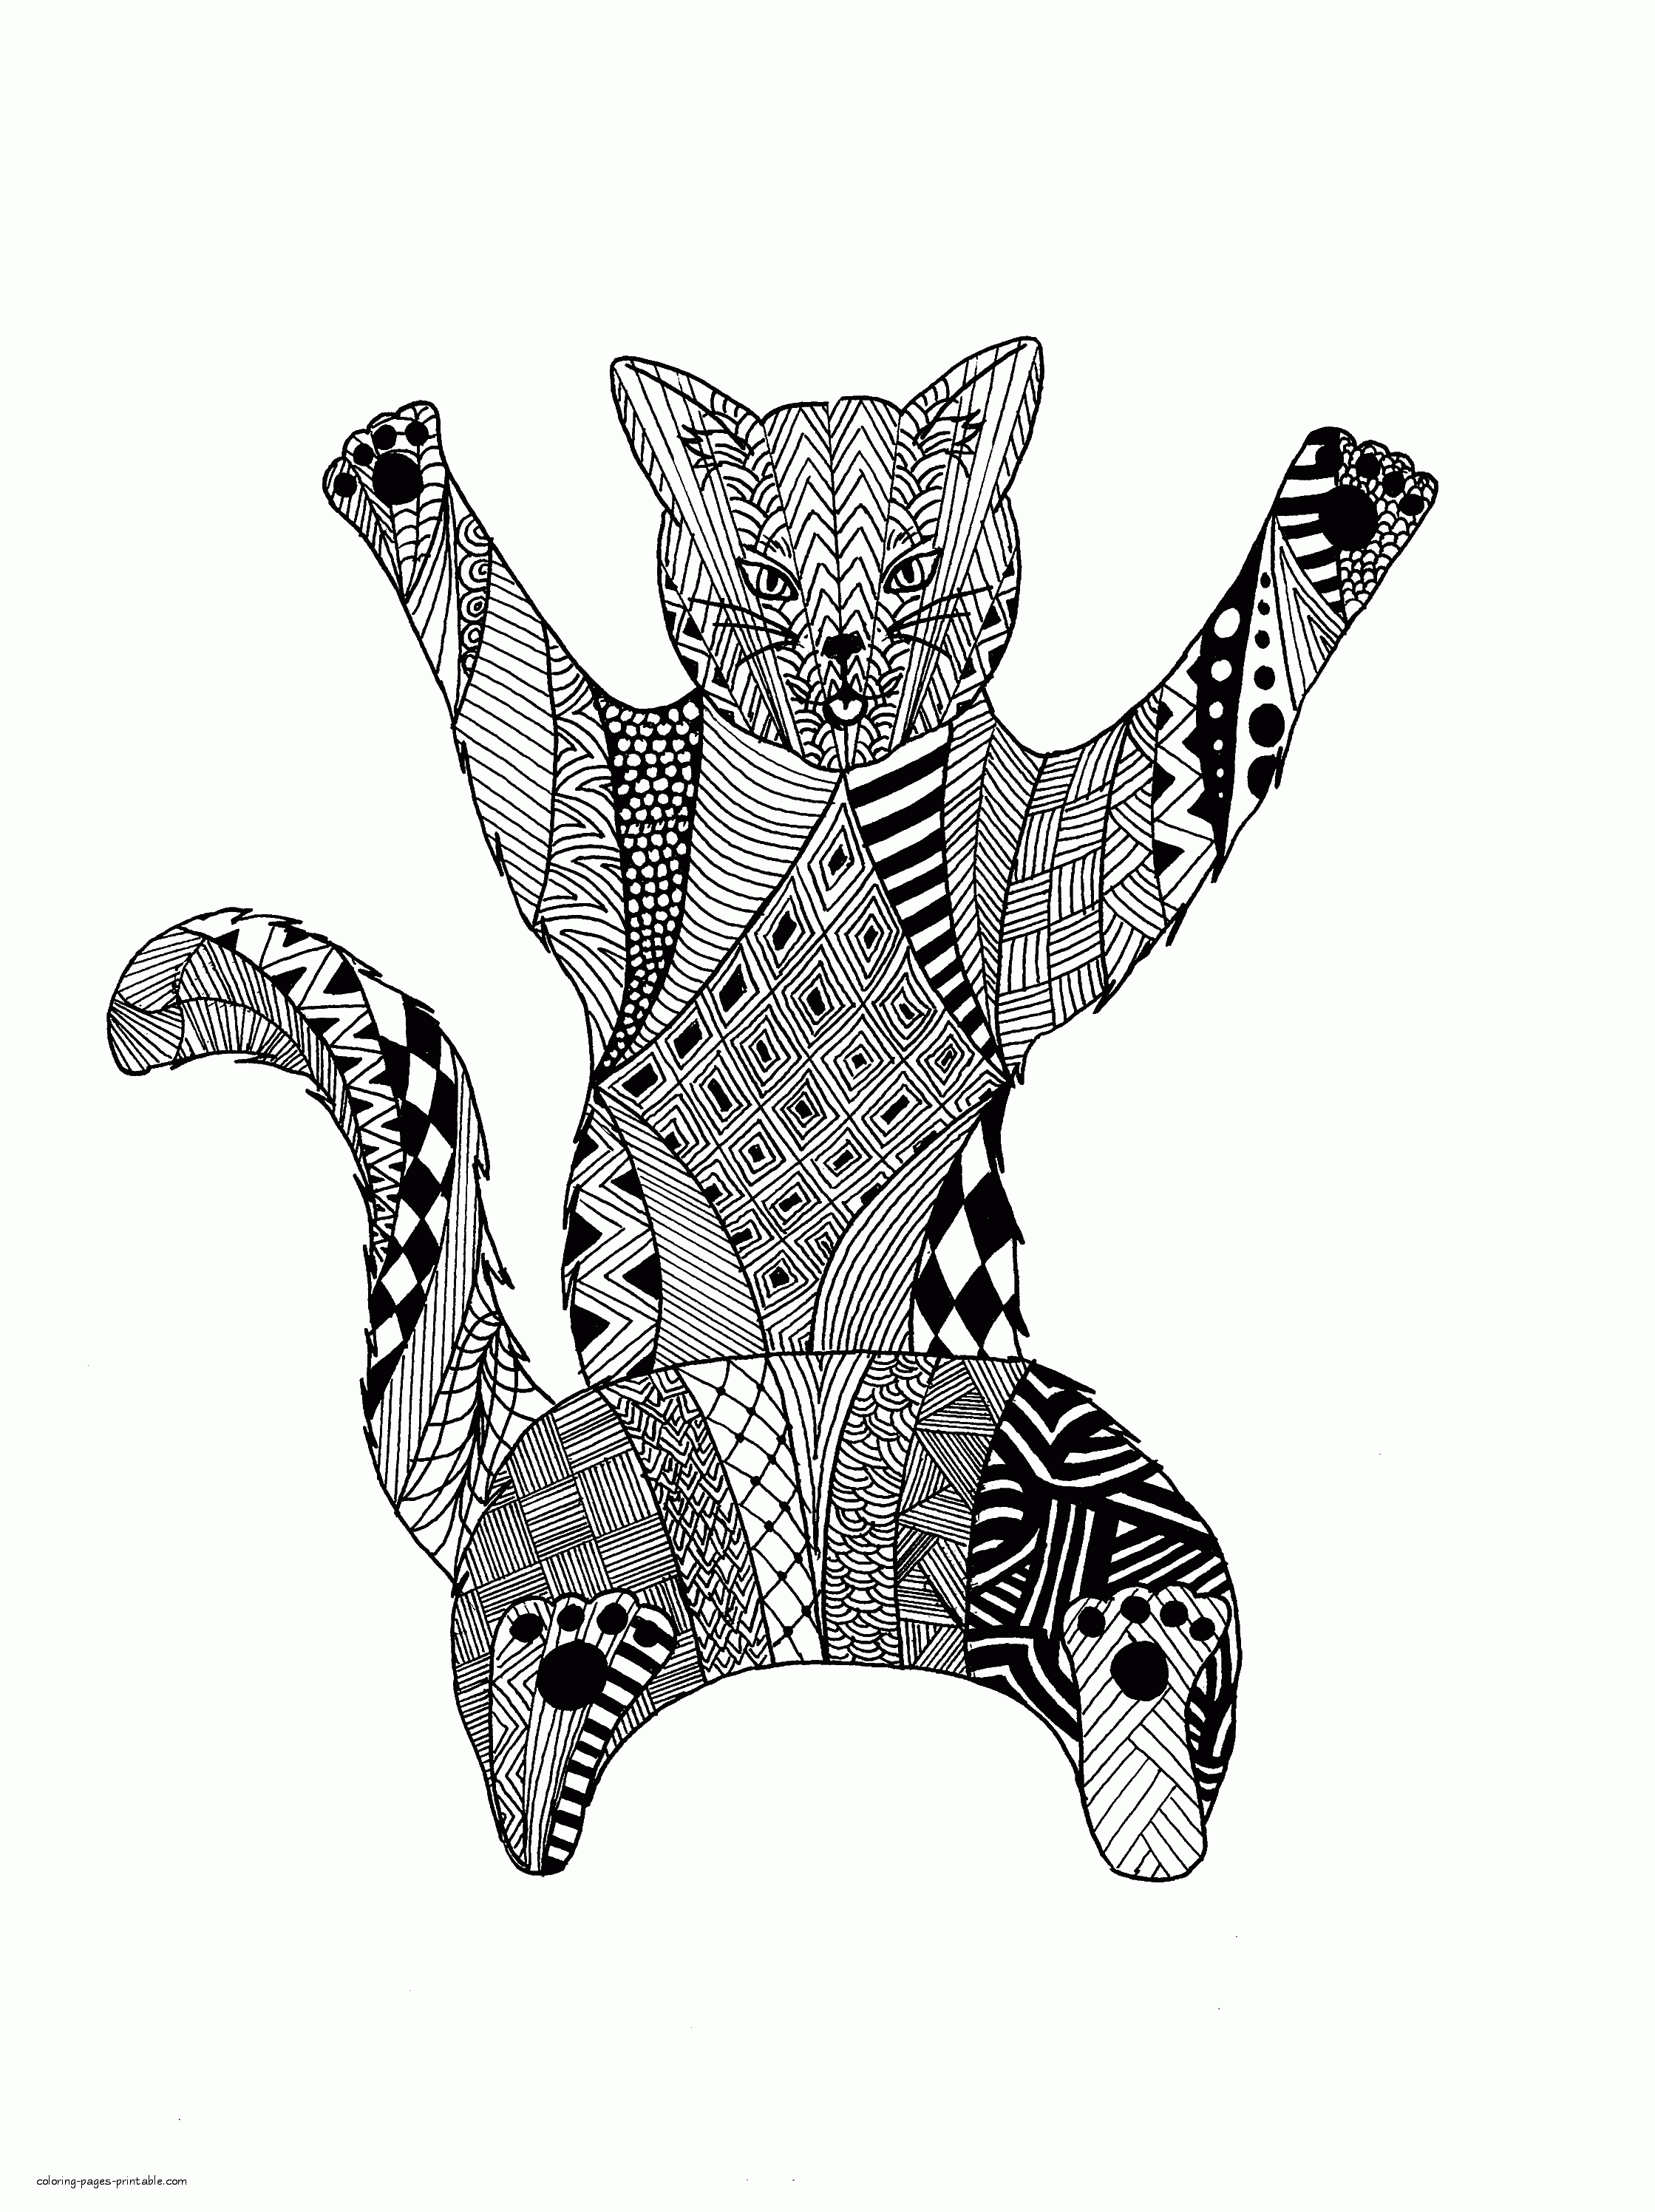 Detailed Animal Coloring Pages For Adults. Cat || COLORING-PAGES